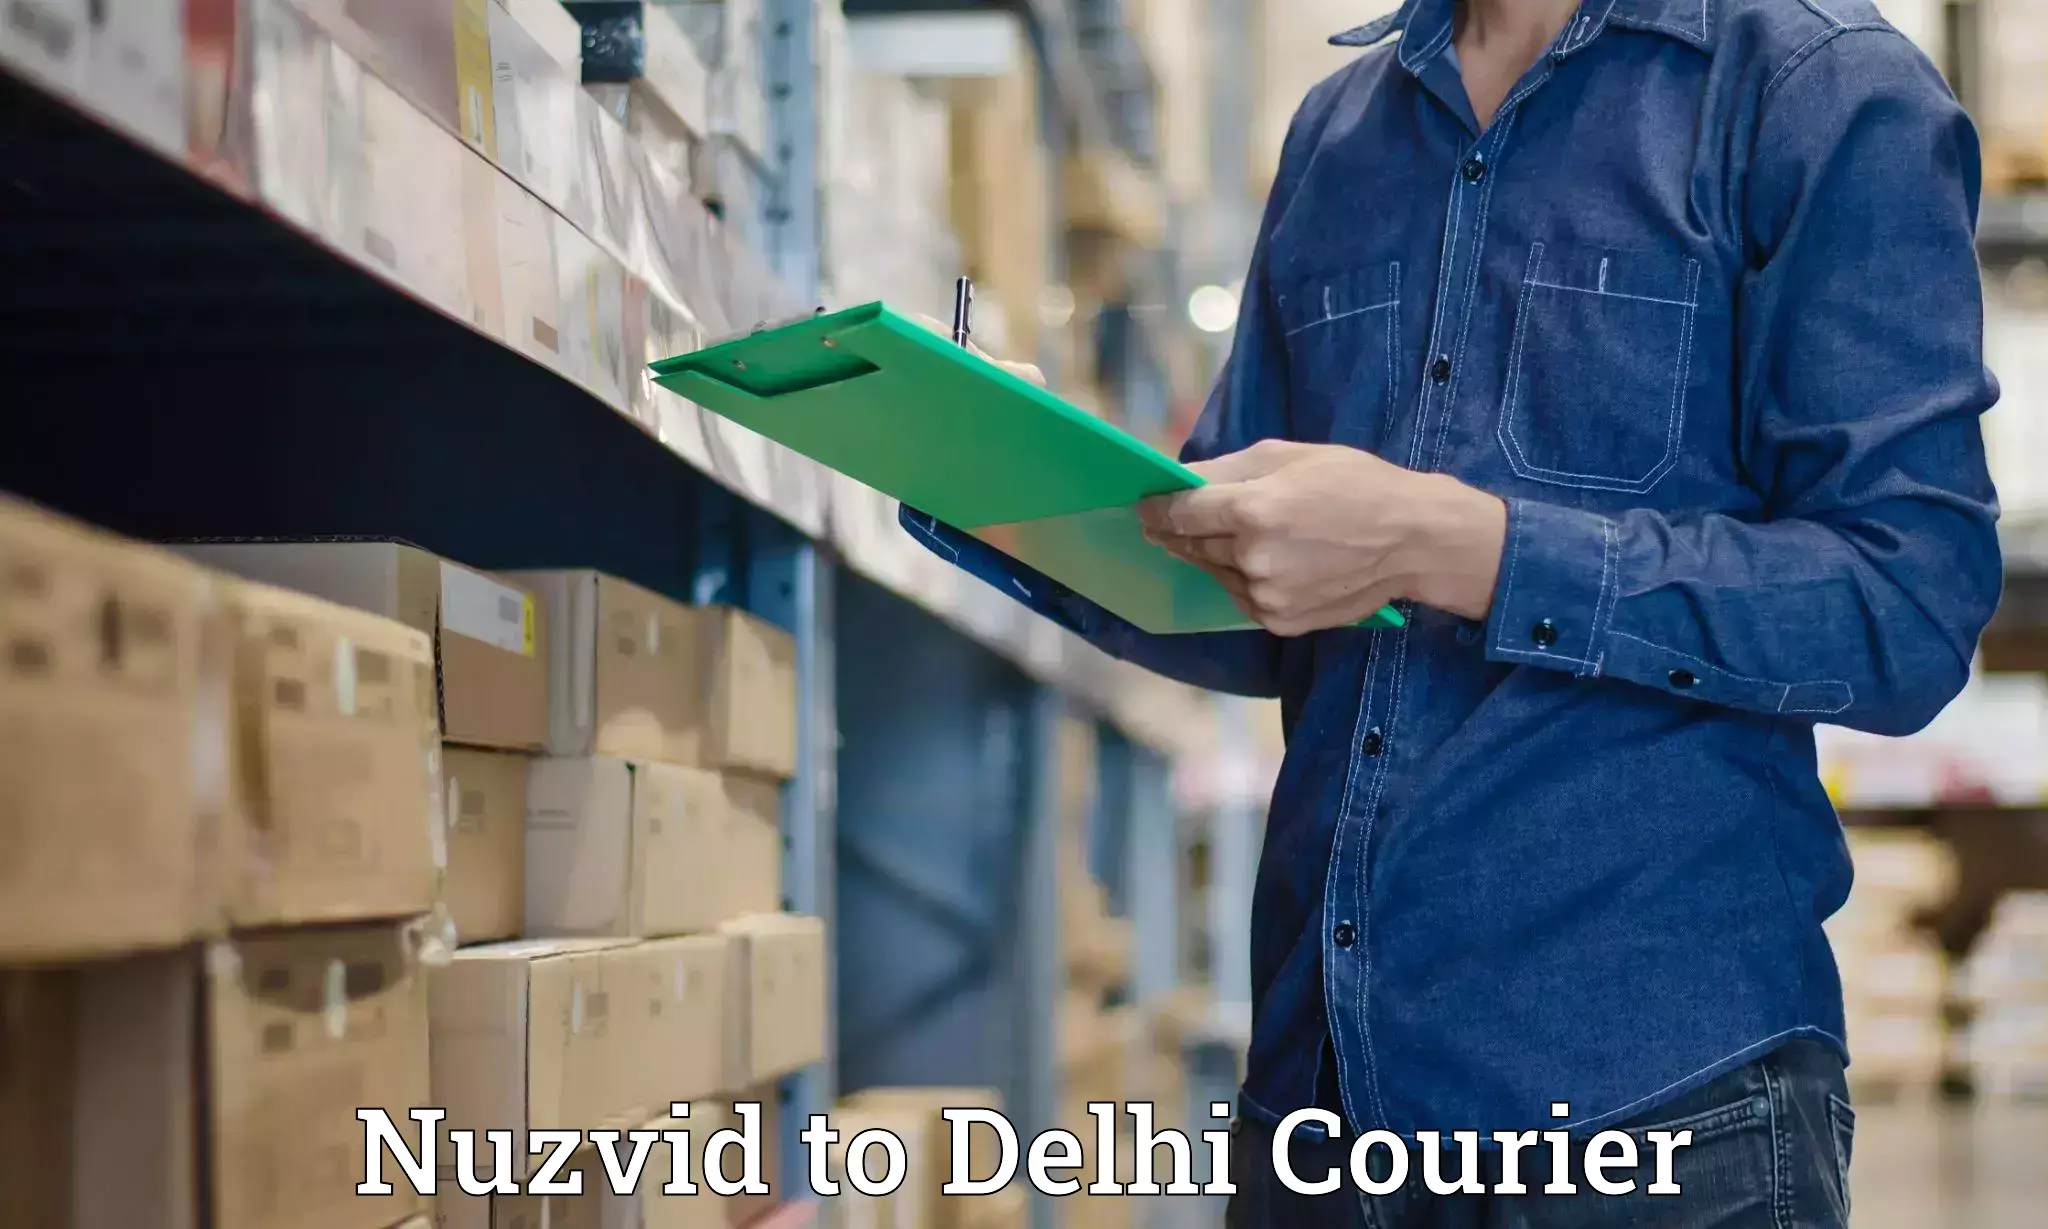 24/7 courier service Nuzvid to Lodhi Road